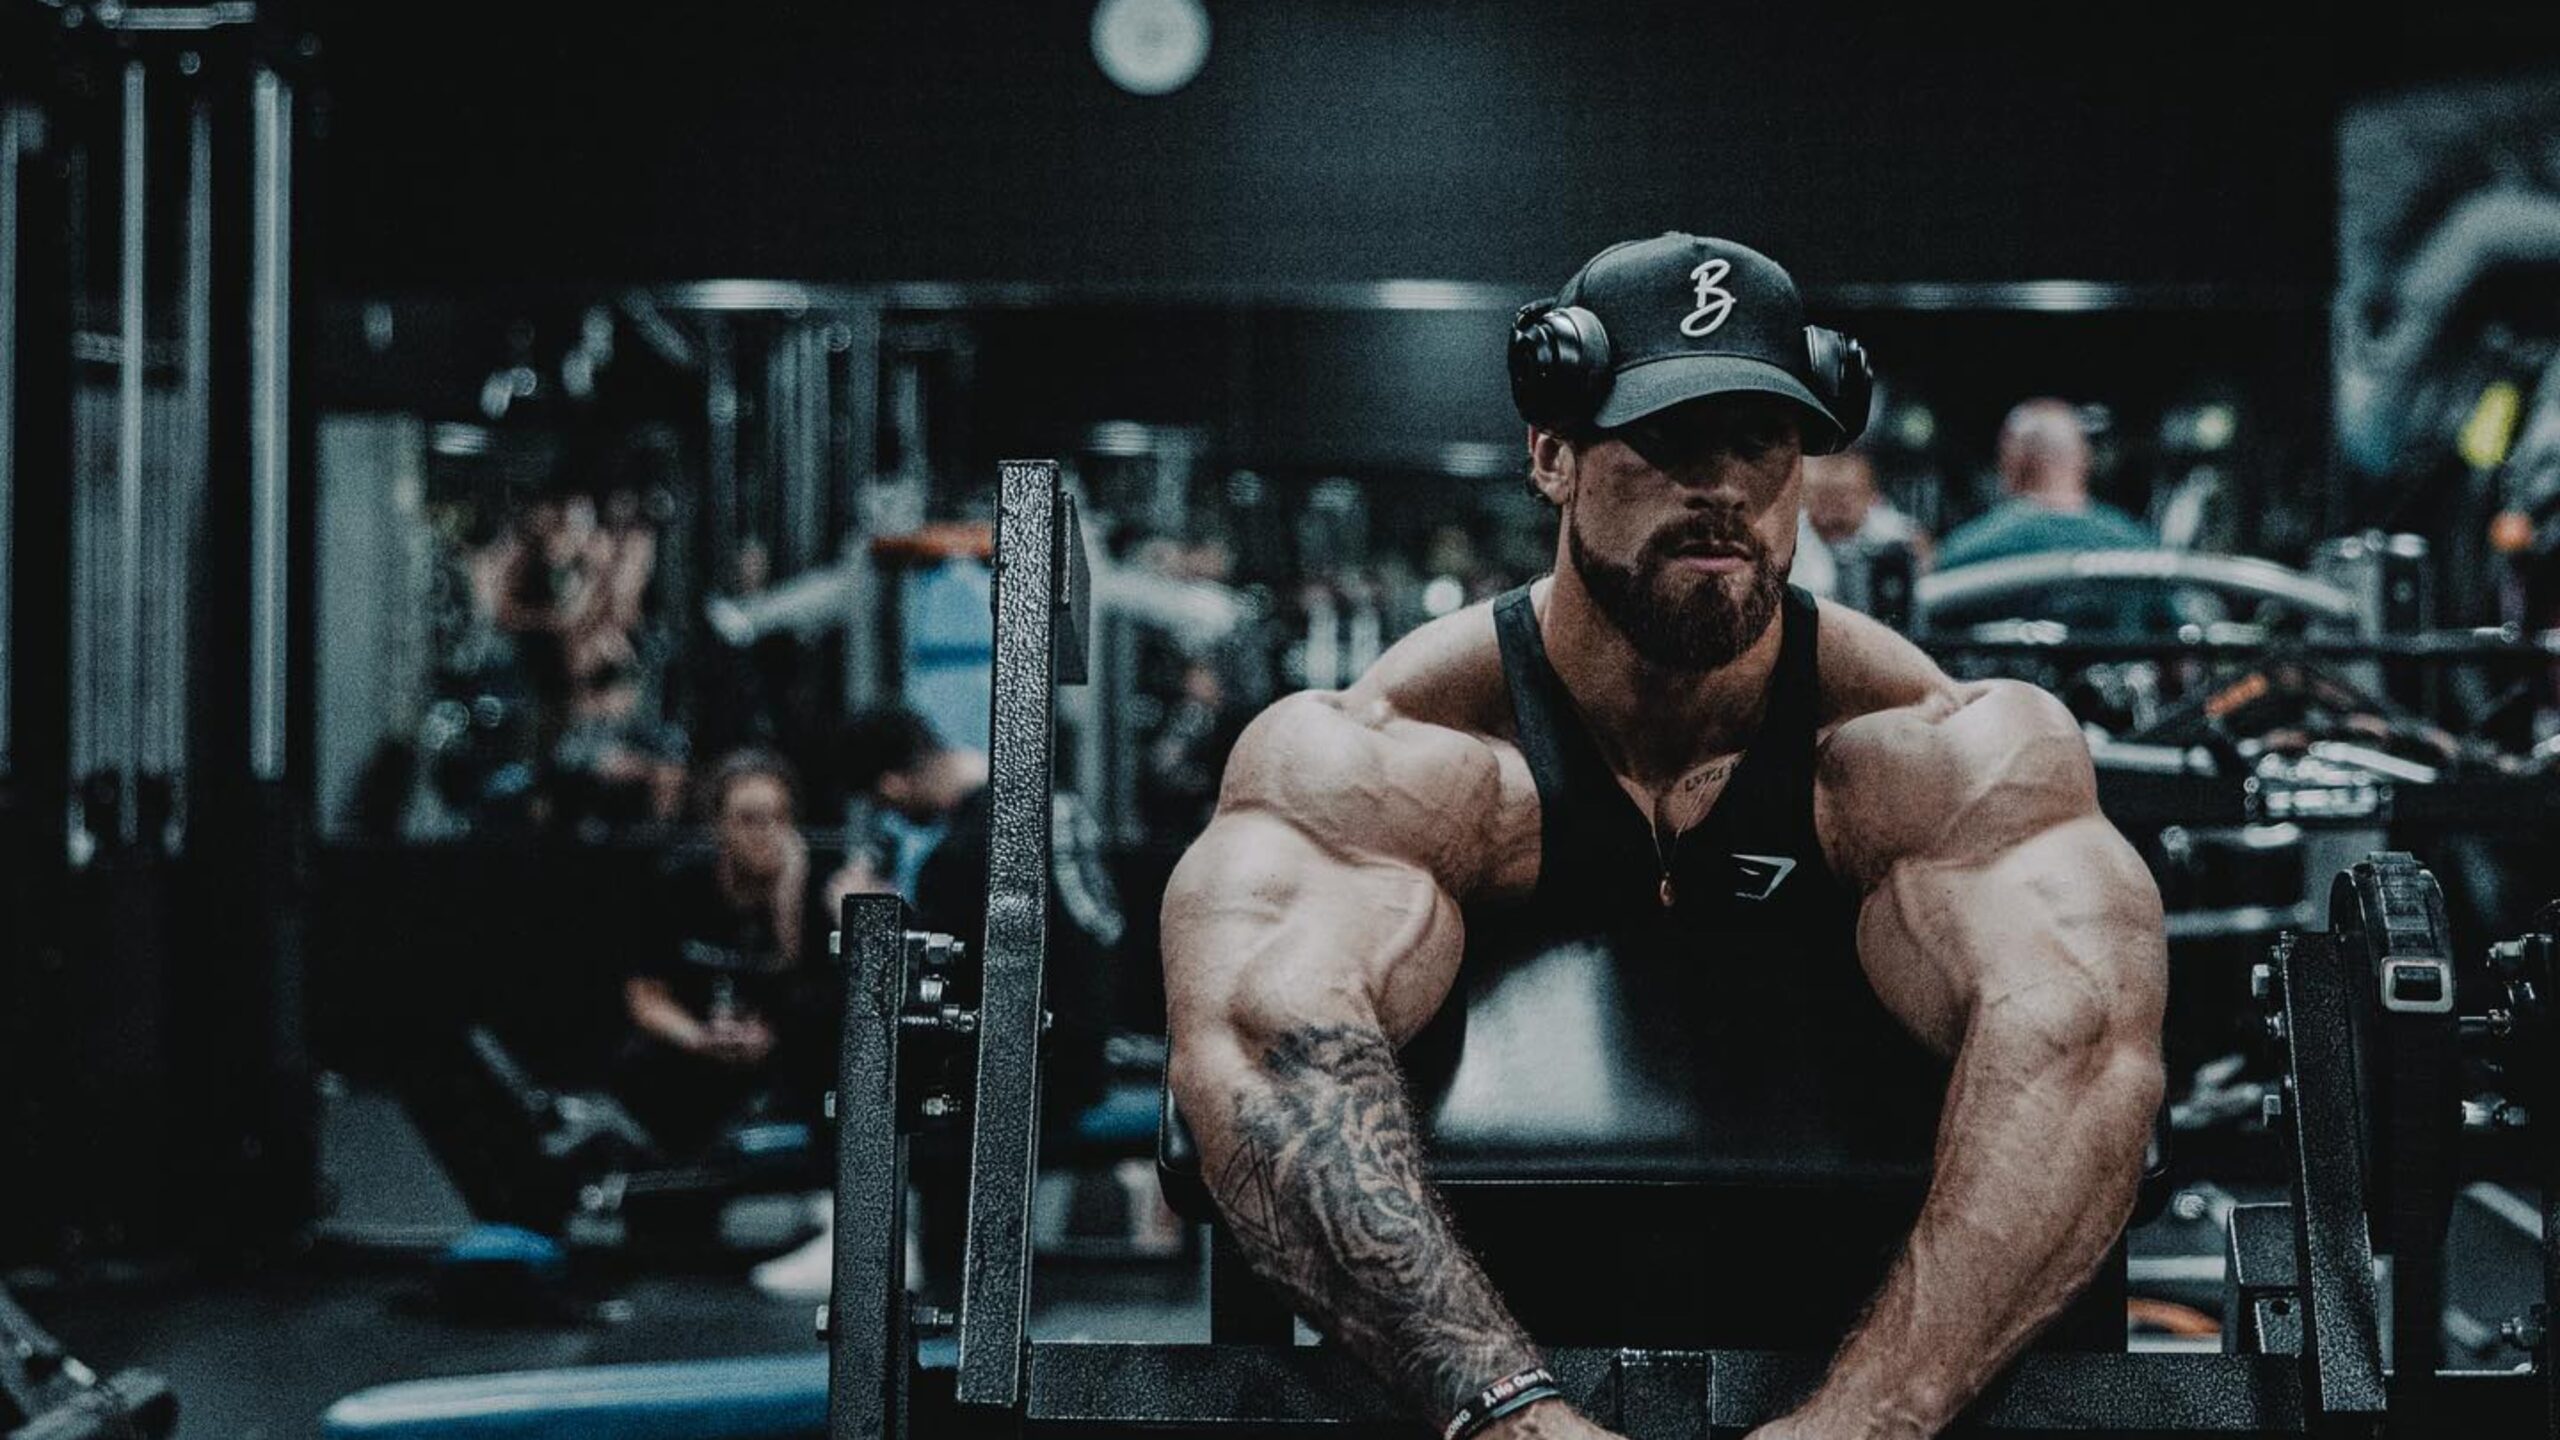 Chris Bumstead 4k Wallpaper For PC